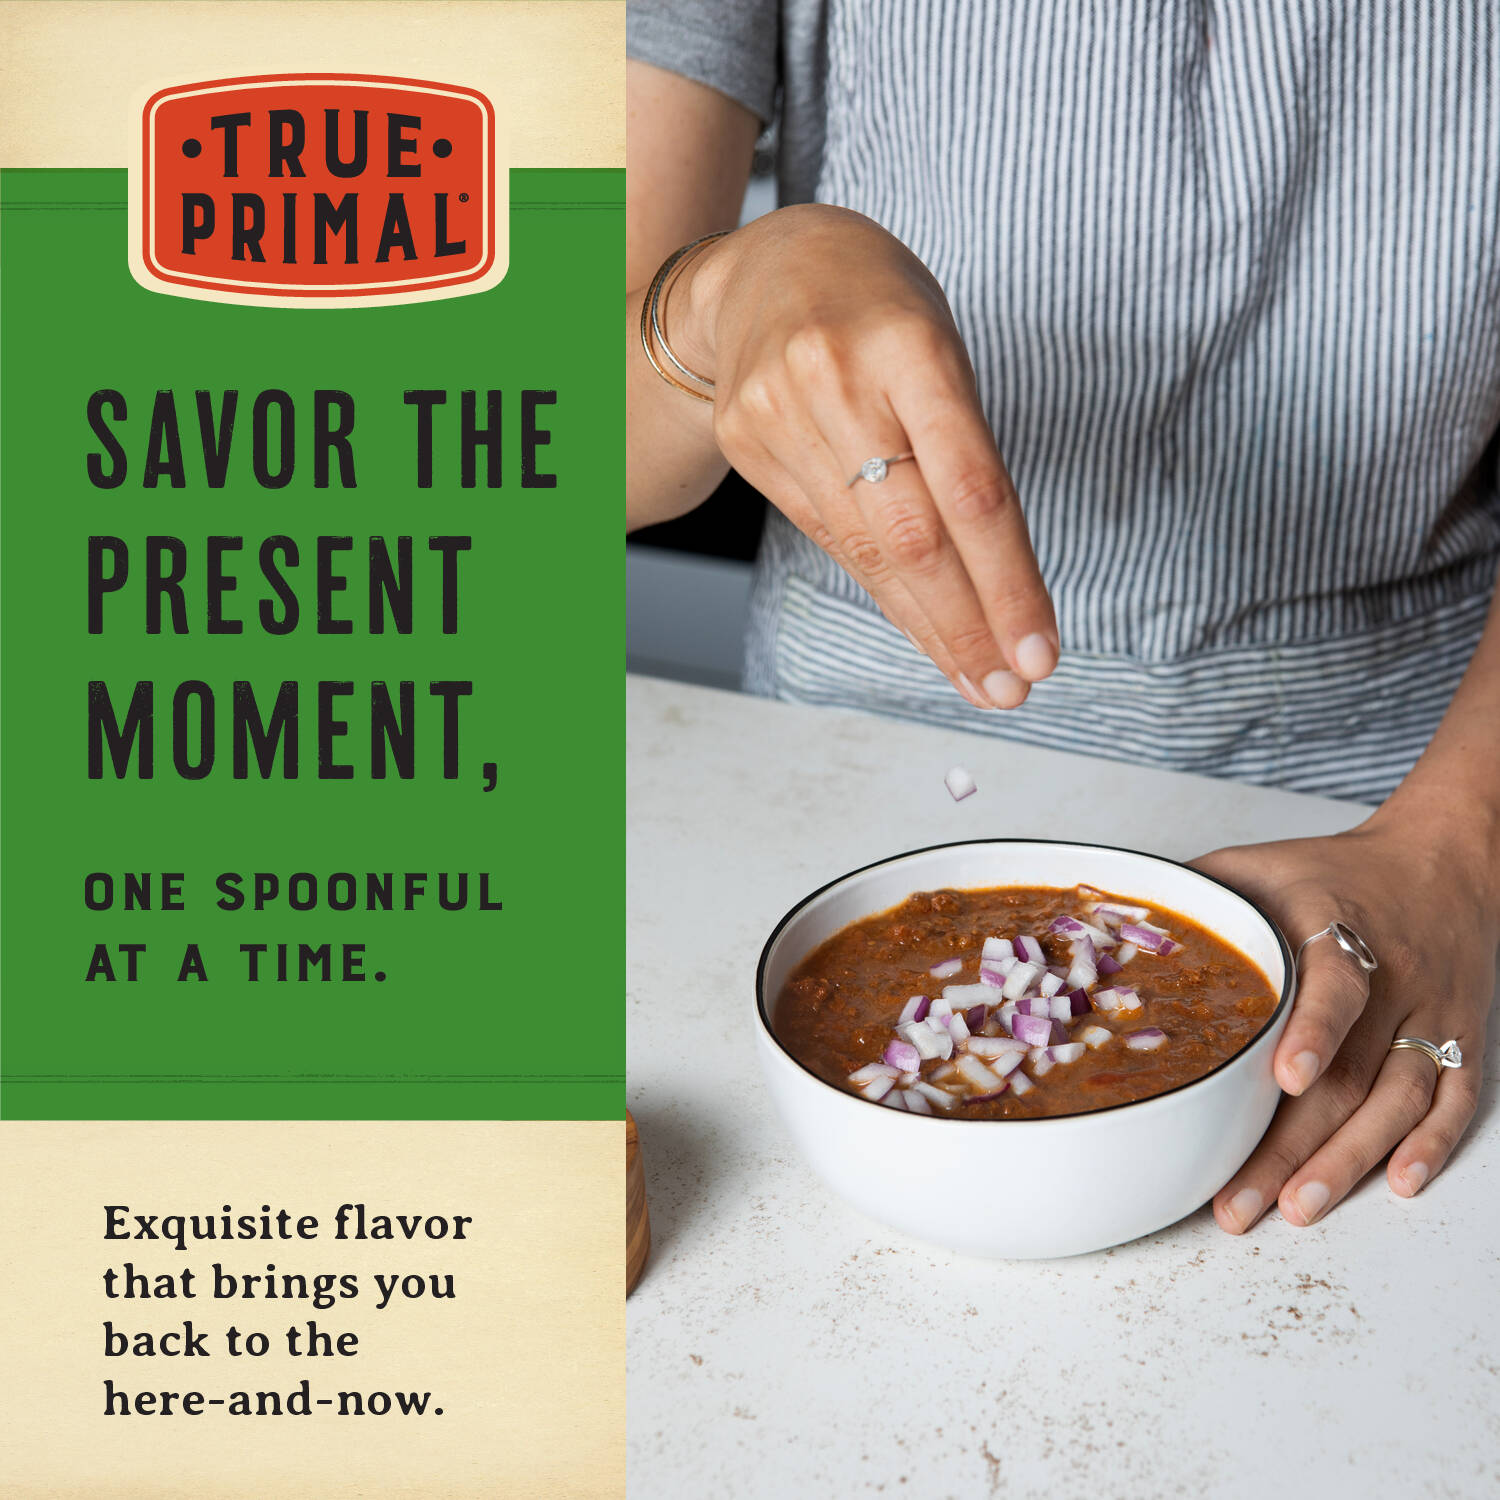 woman sprinkling garnish of onion on chili, with text: Savor the present moment, one spoonful at a time. Exquisite flavor that brings you back to the here-and-now